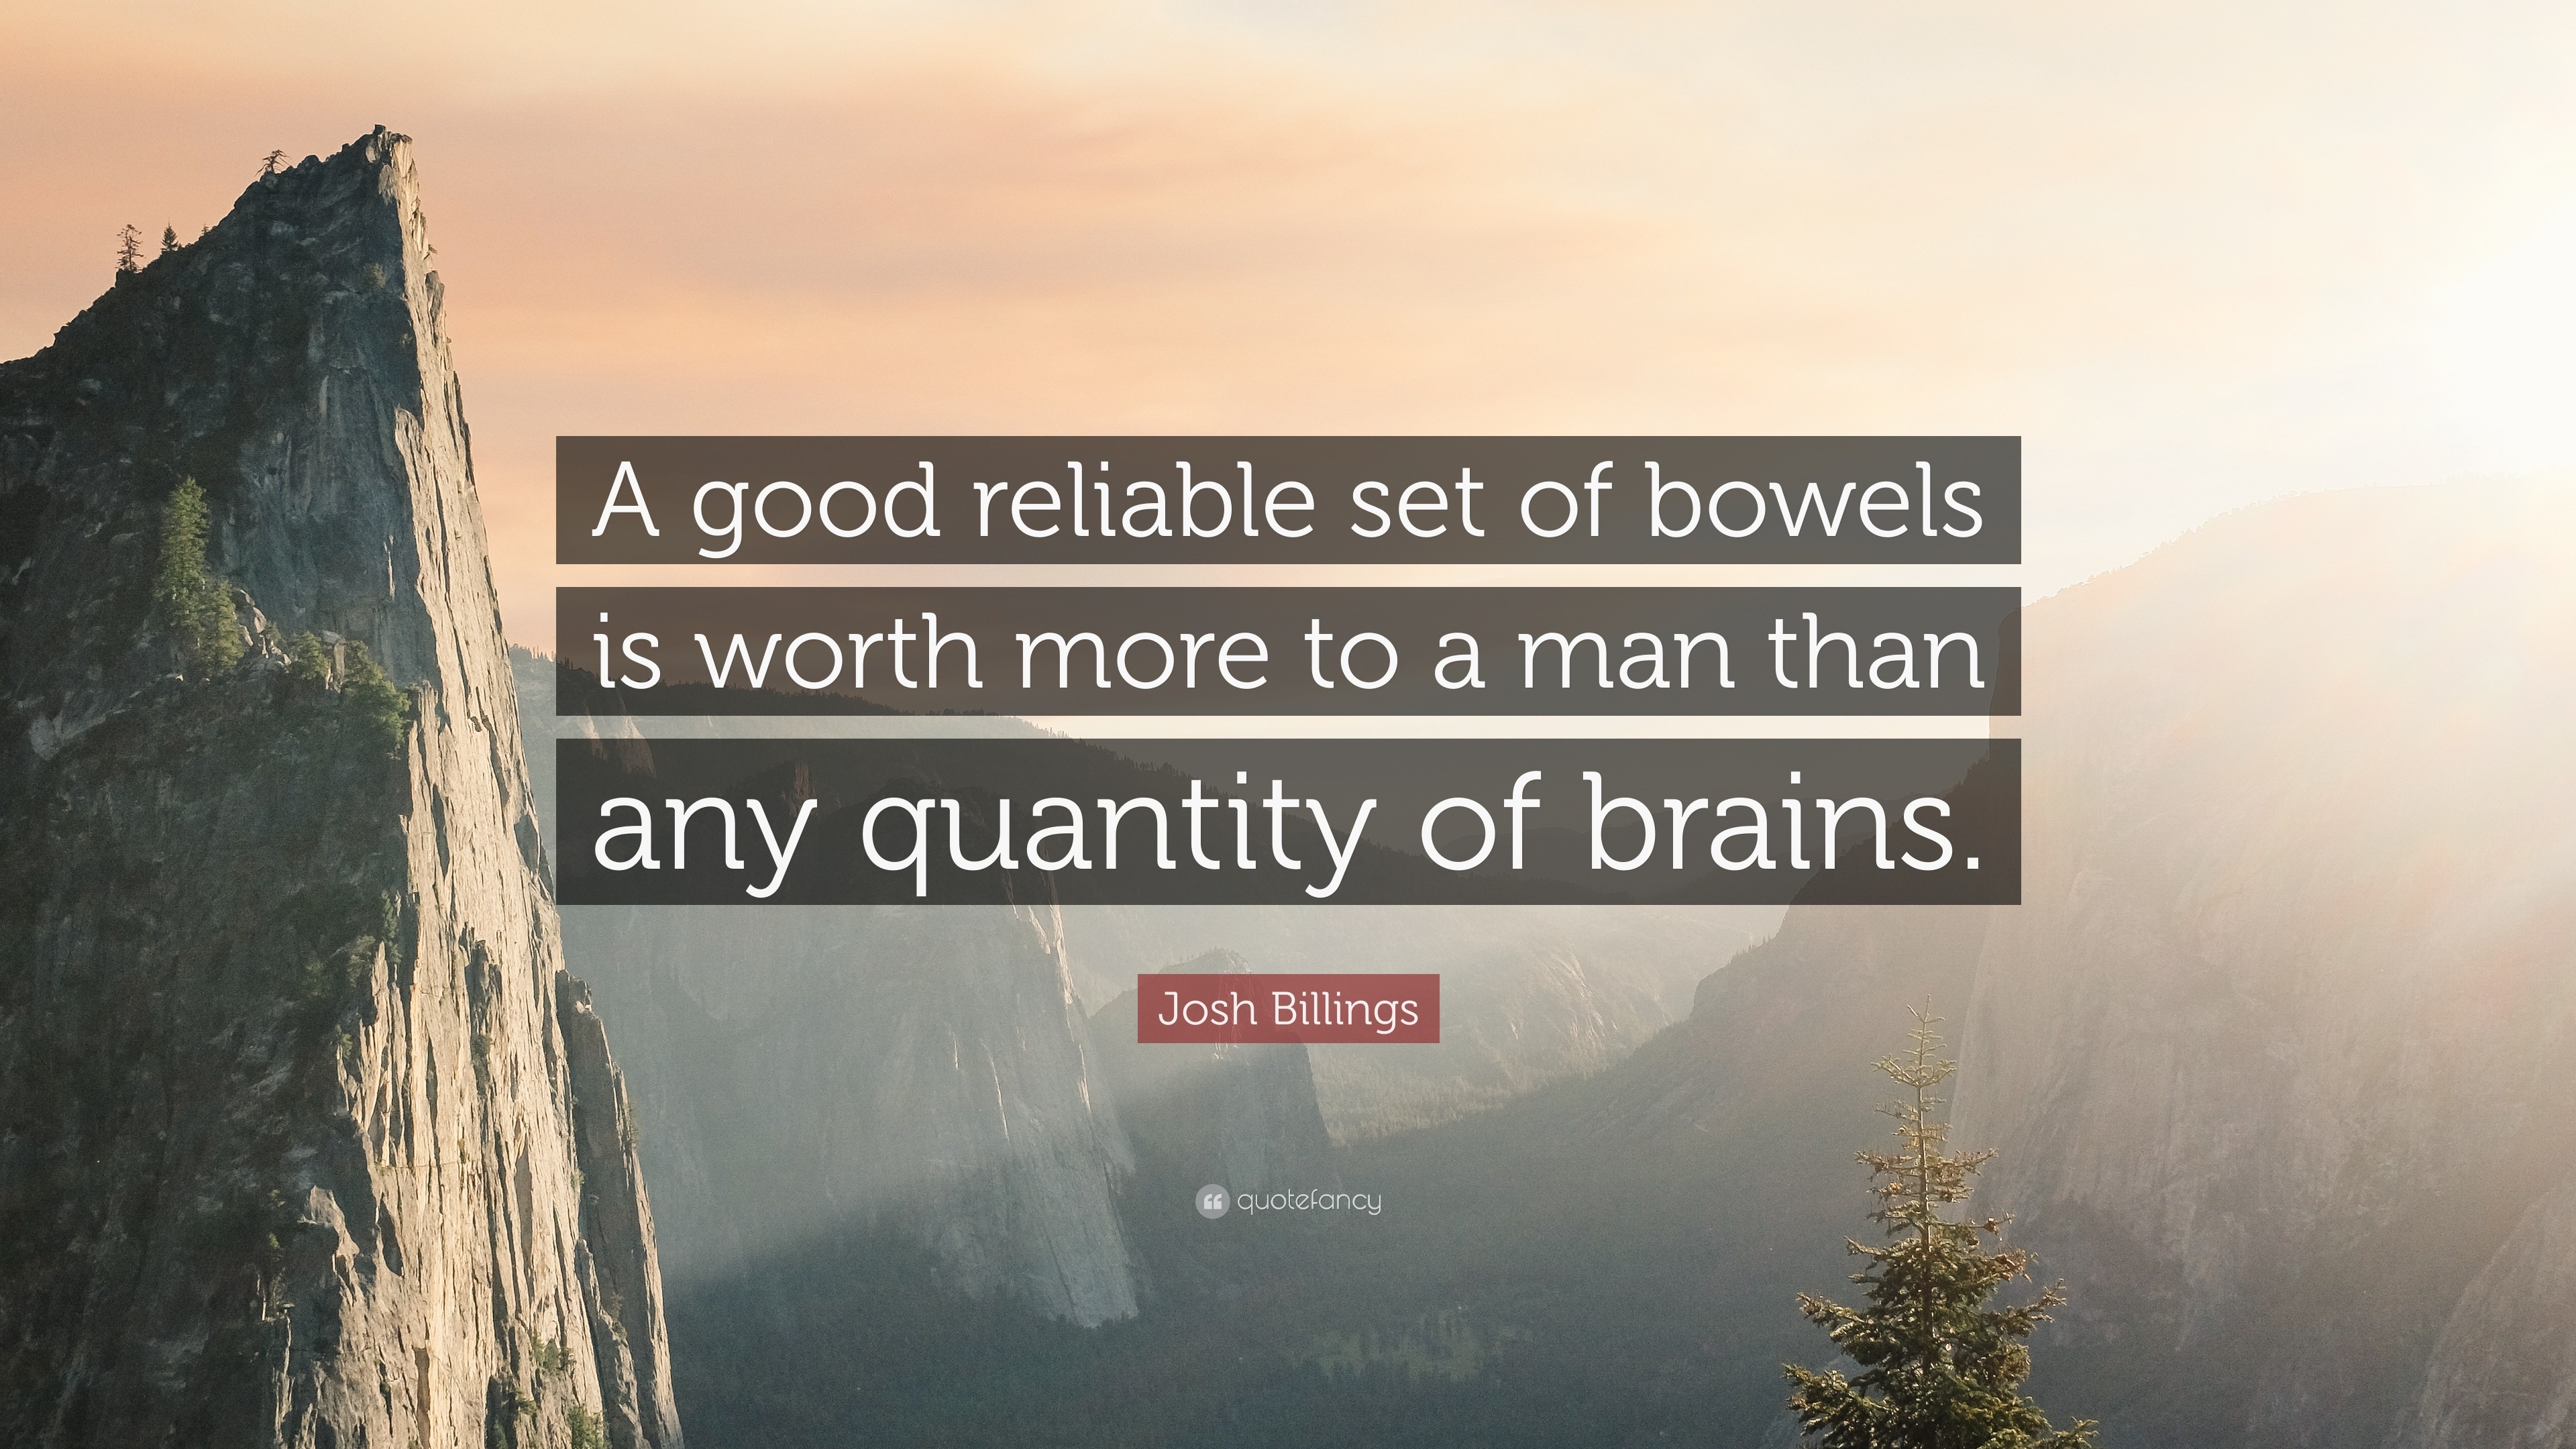 582859-Josh-Billings-Quote-A-good-reliable-set-of-bowels-is-worth-more-to.jpg